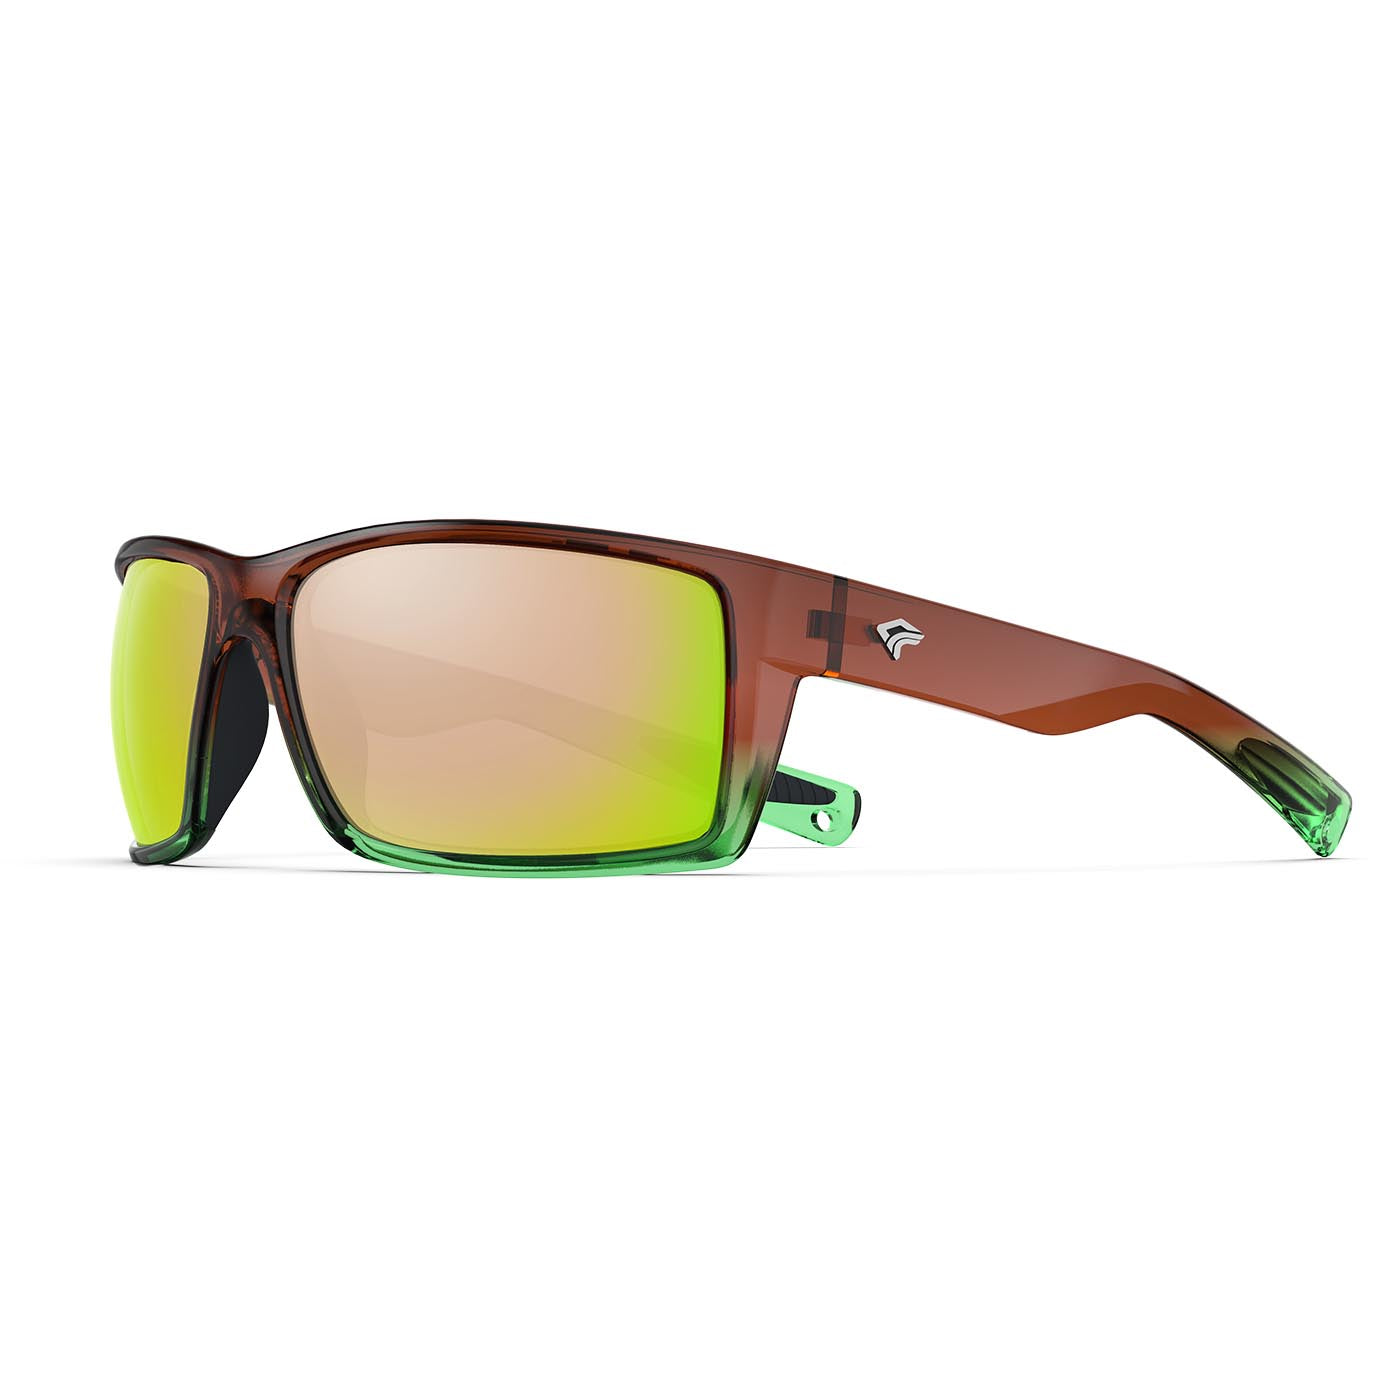 Torege 'Chameleon' Polarized Sports Sunglasses for Men and Women with Lifetime Warranty - Perfect for Sports, Fishing, Boating, Beach, Golf & Driving